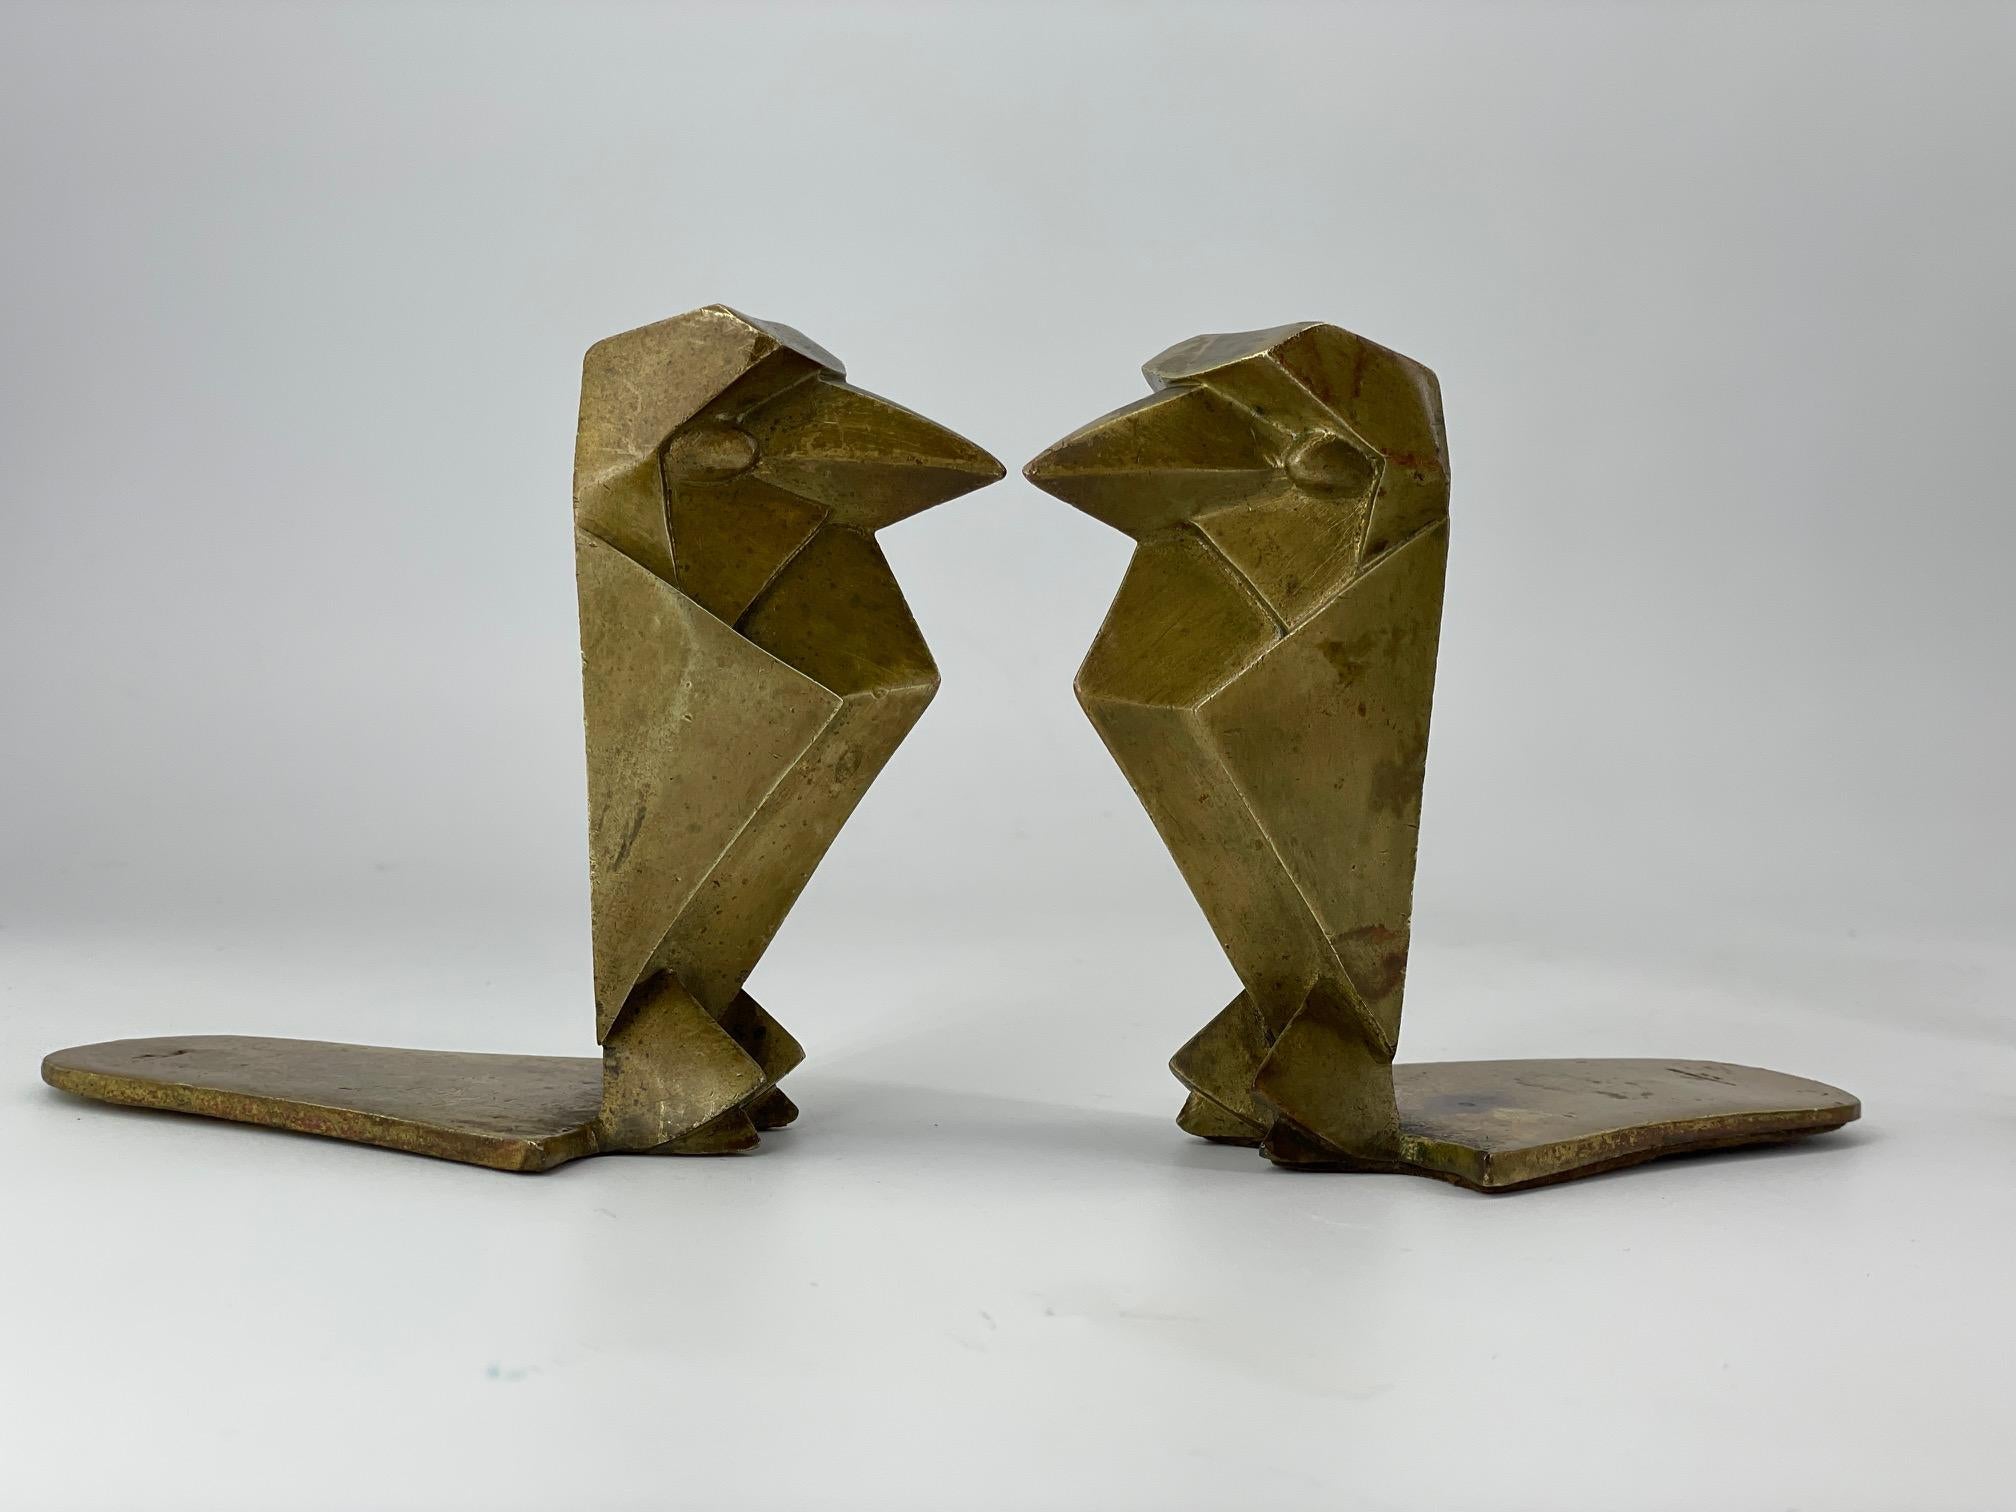 Pair of brass American Art Deco Bird bookends designed in sharply geometric patterns, like metropolis architectural elements of the 1920-1940.   Each bird is stamped 